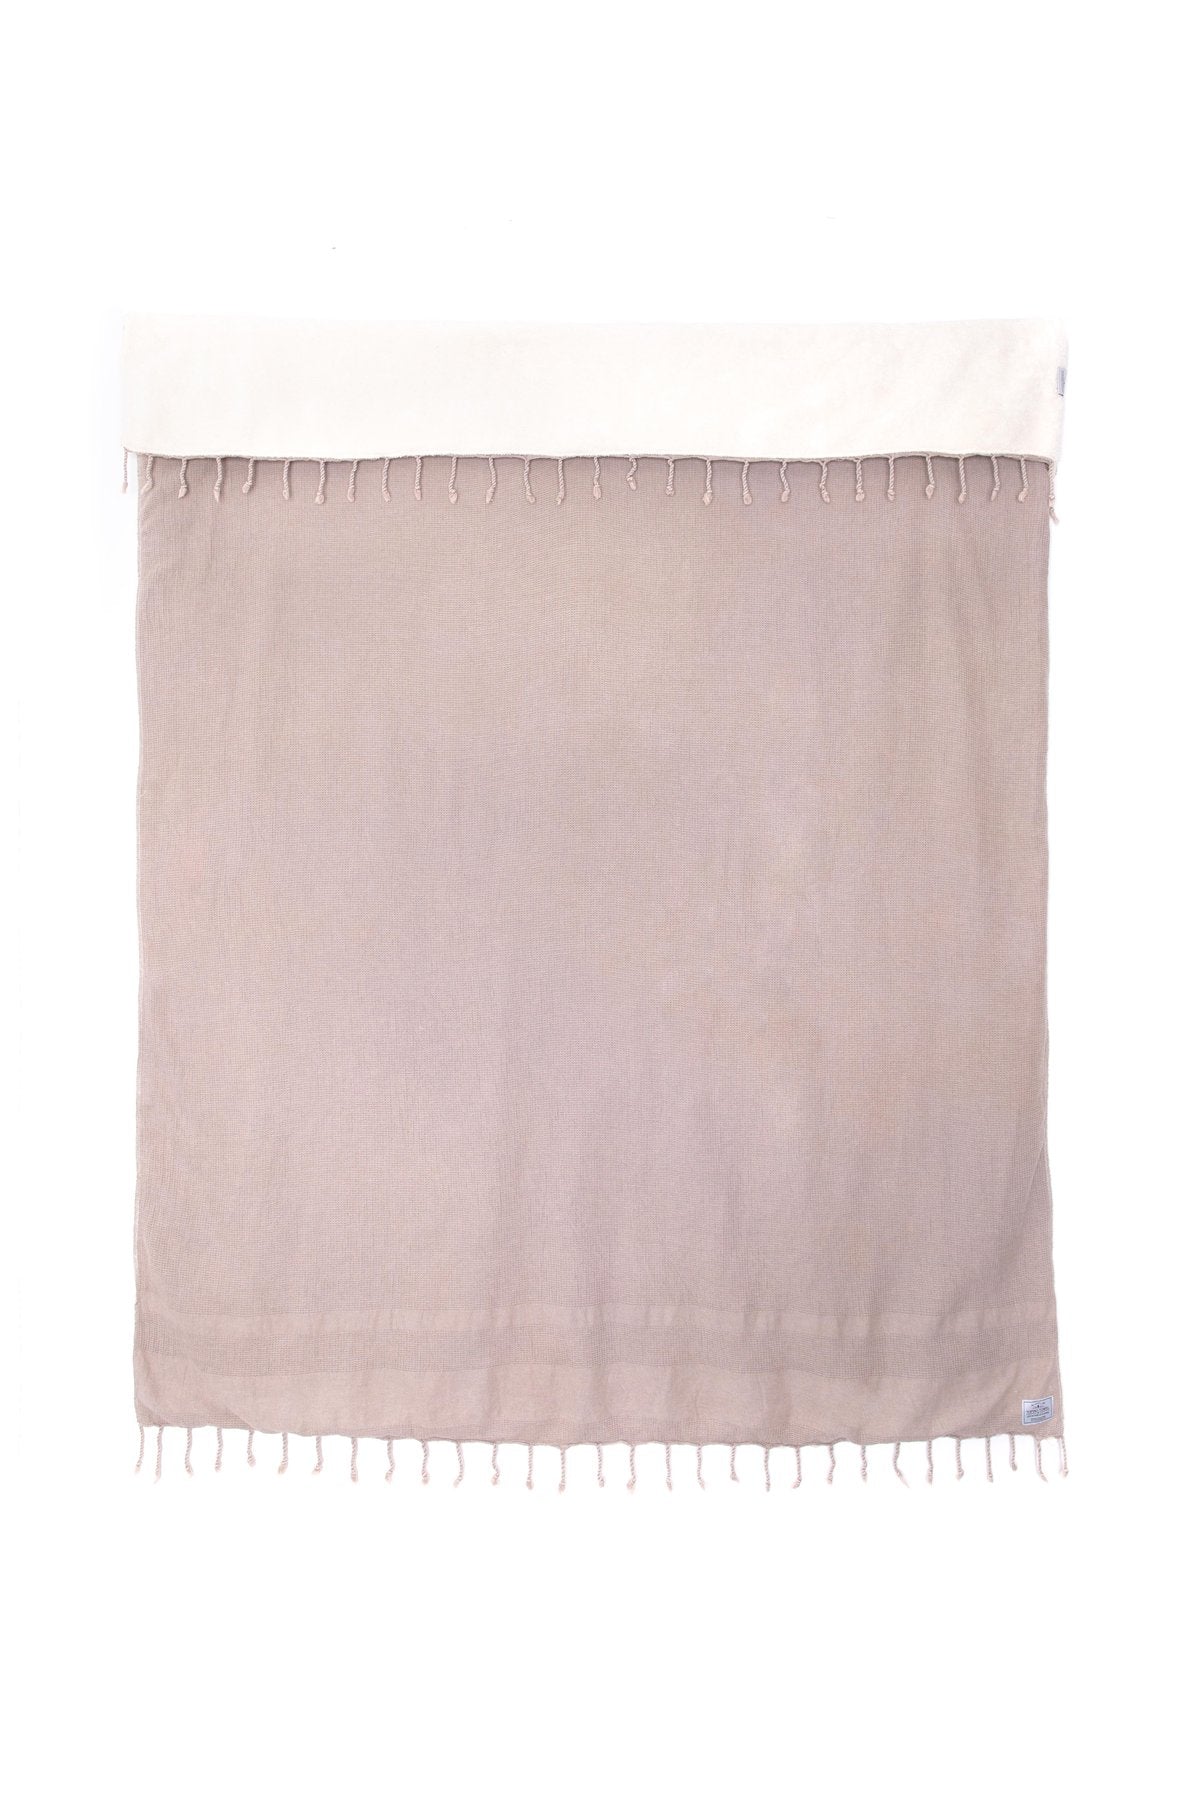 TOFINO TOWEL THE SHORE WASHED WAFFLE THROW MINK